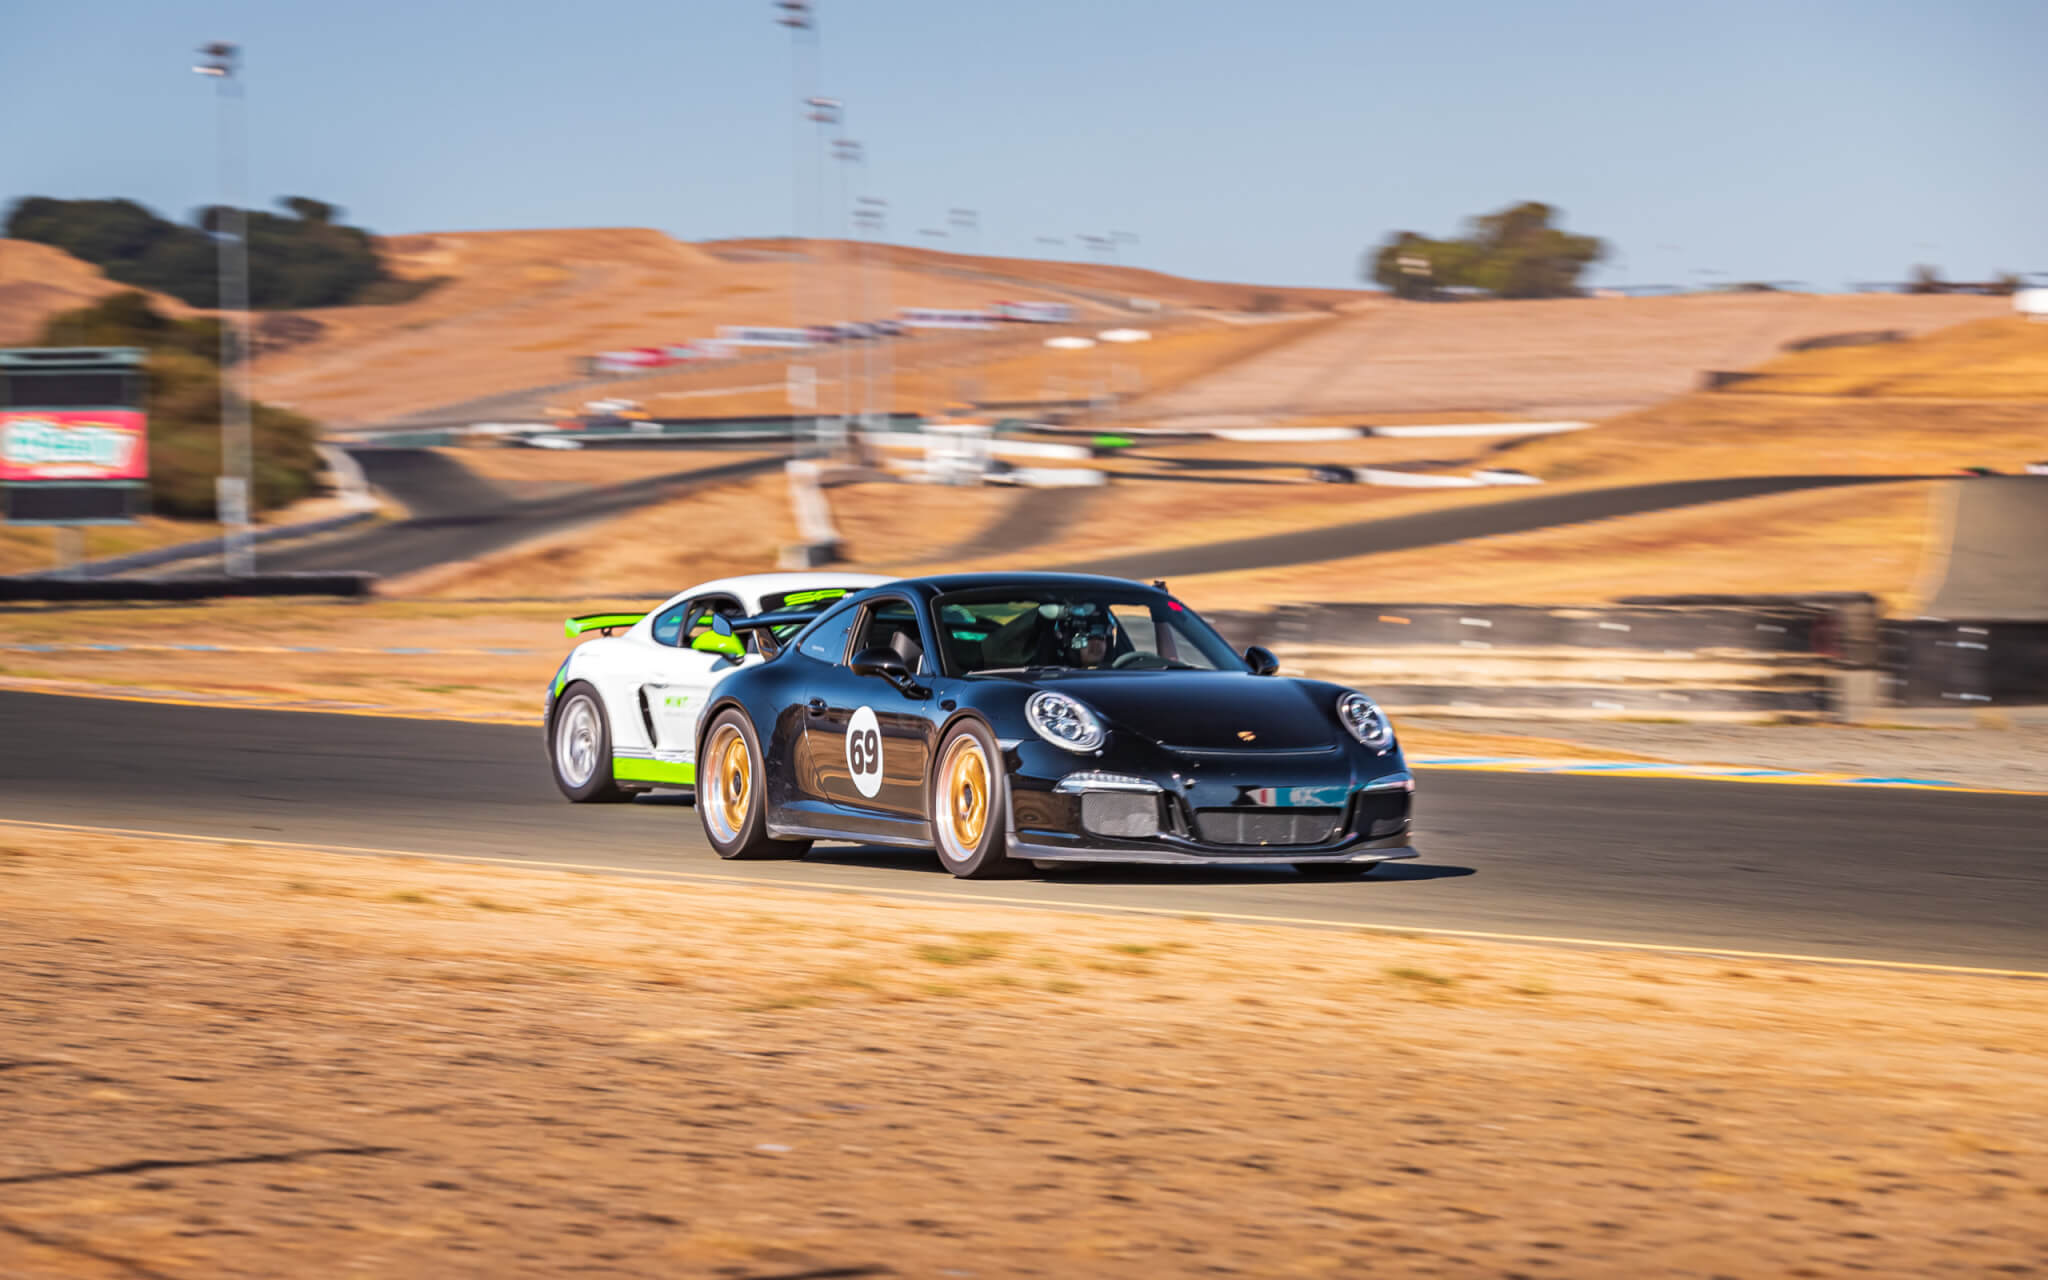 Purple GT3 #512 Crossing the finish line at the track